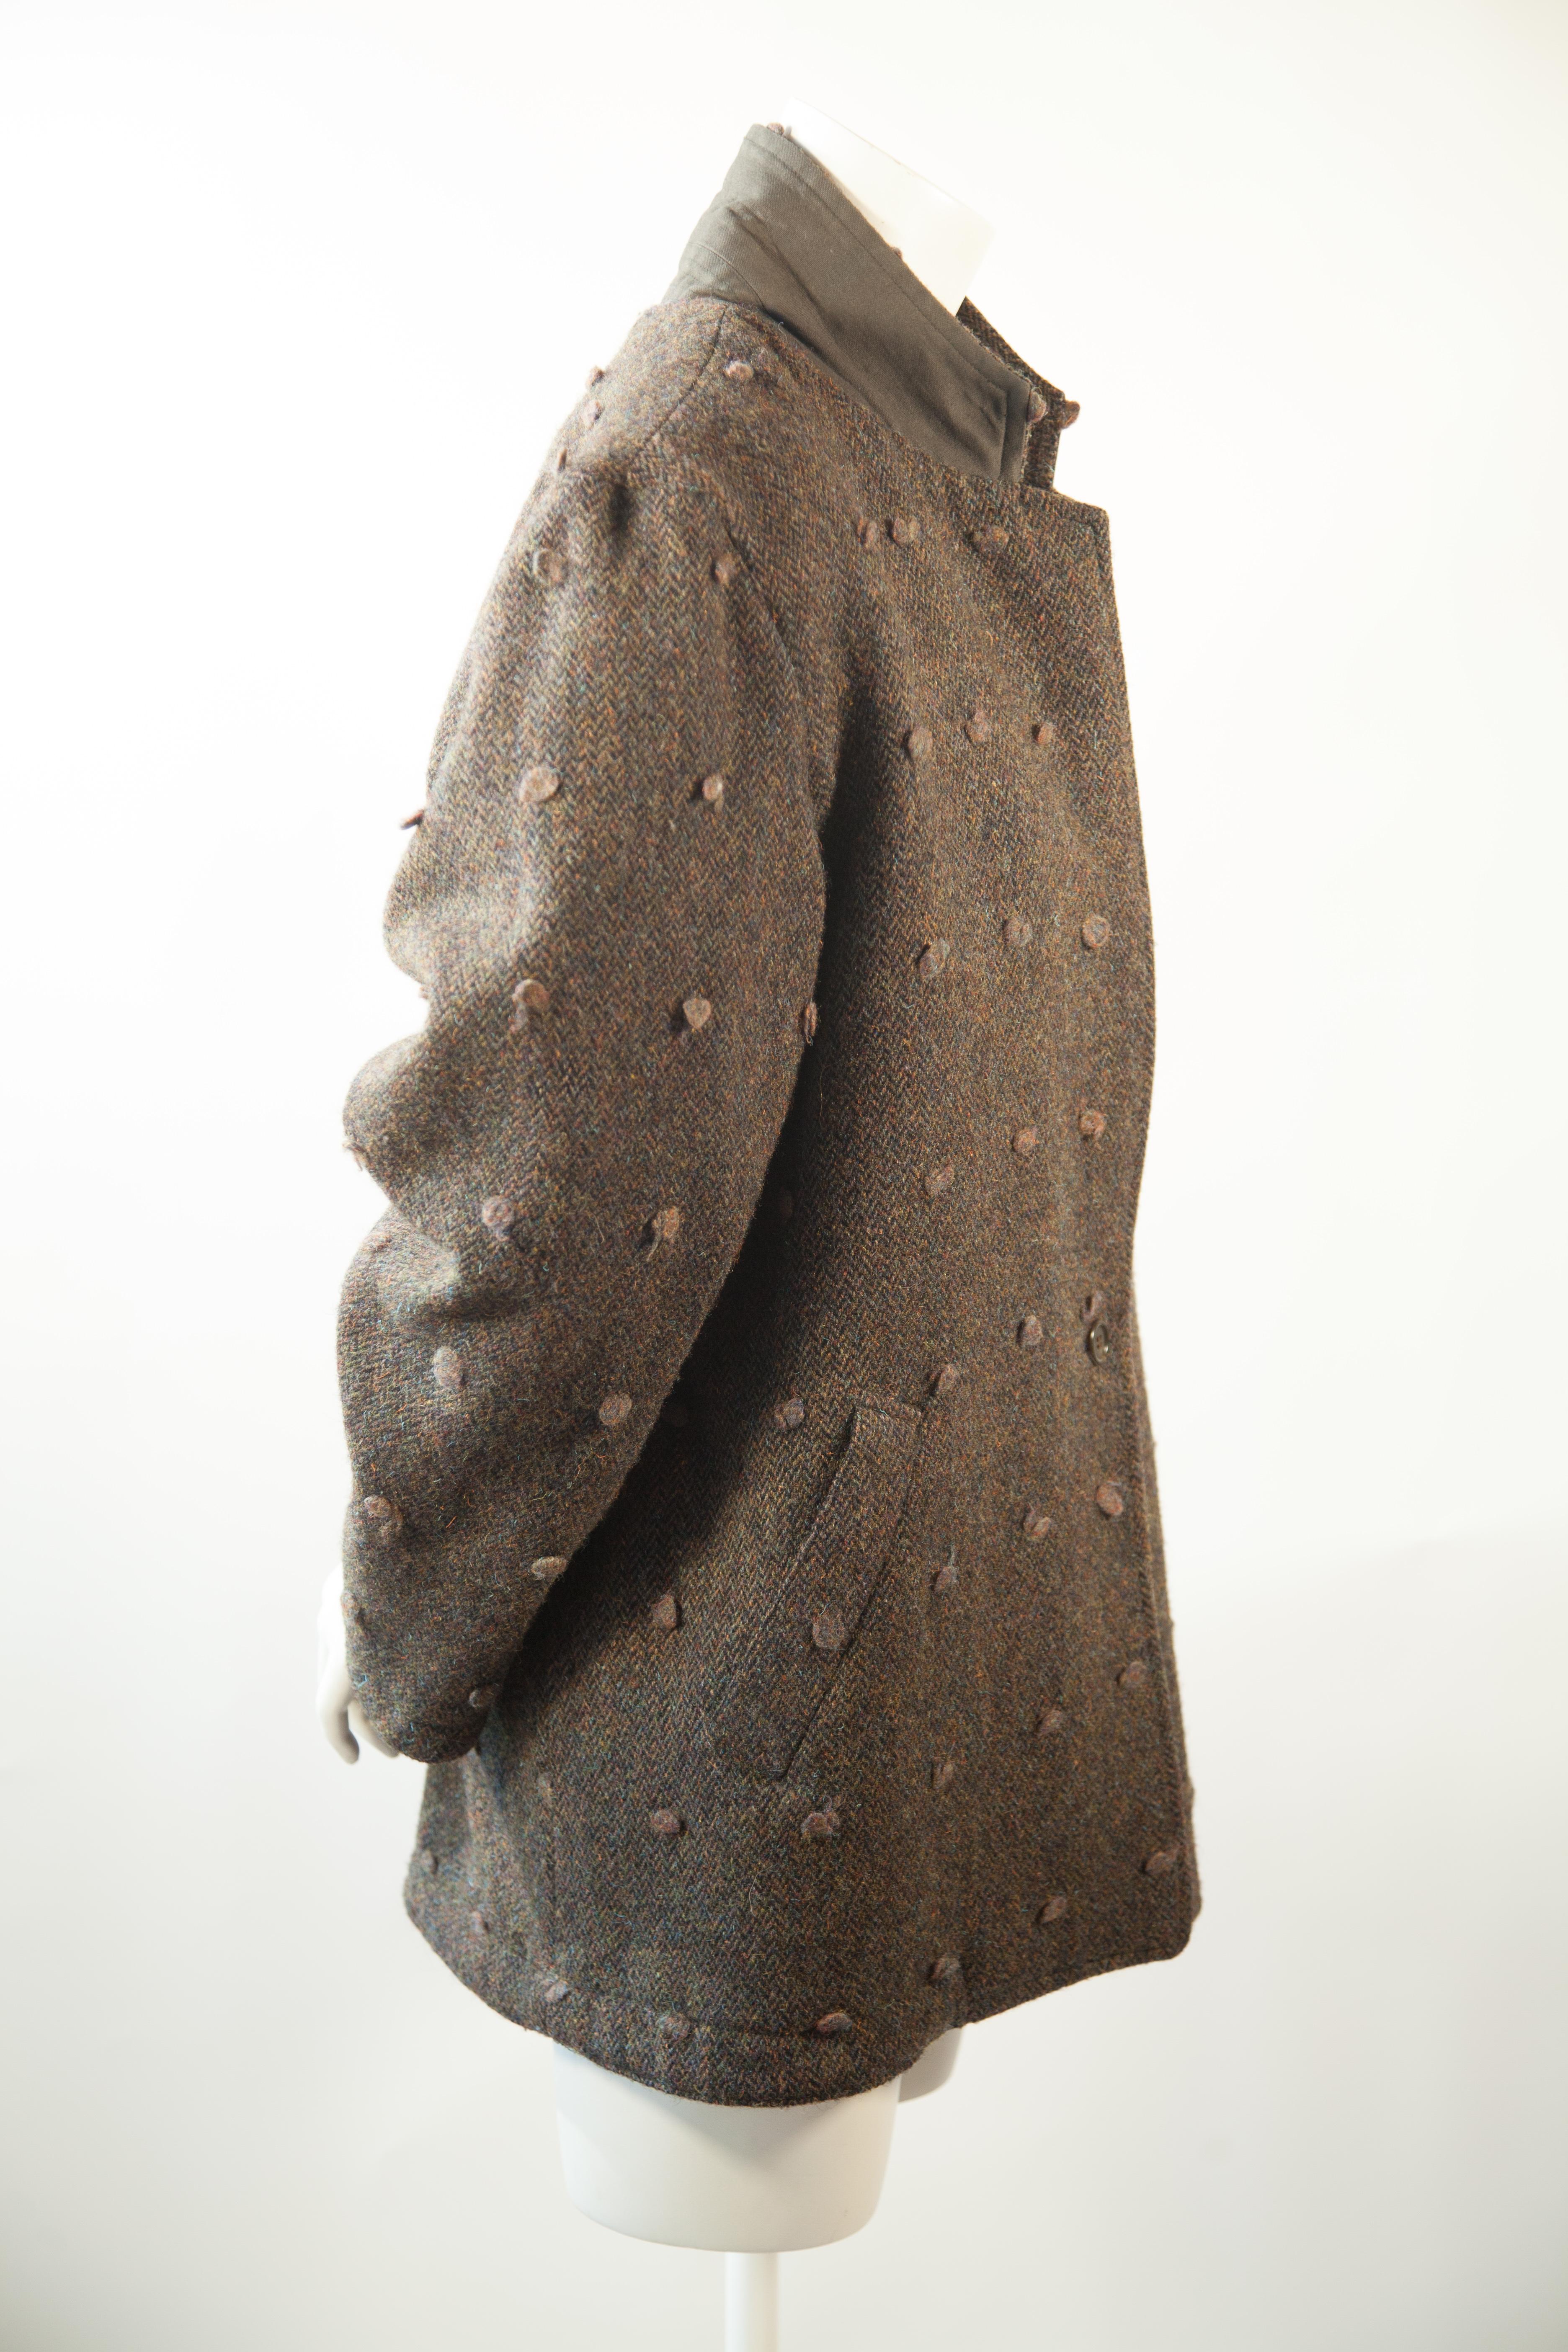 Issey Miyake, Circa 1970s
Reversible, Green, Wool, Tweed

Raised Wool Dots Pattern throughout and,

Trench Style Coat on reverse.

Issey Miyake lettering on back of collar.

Issey Miyake's innovative construction is further embellished with silk